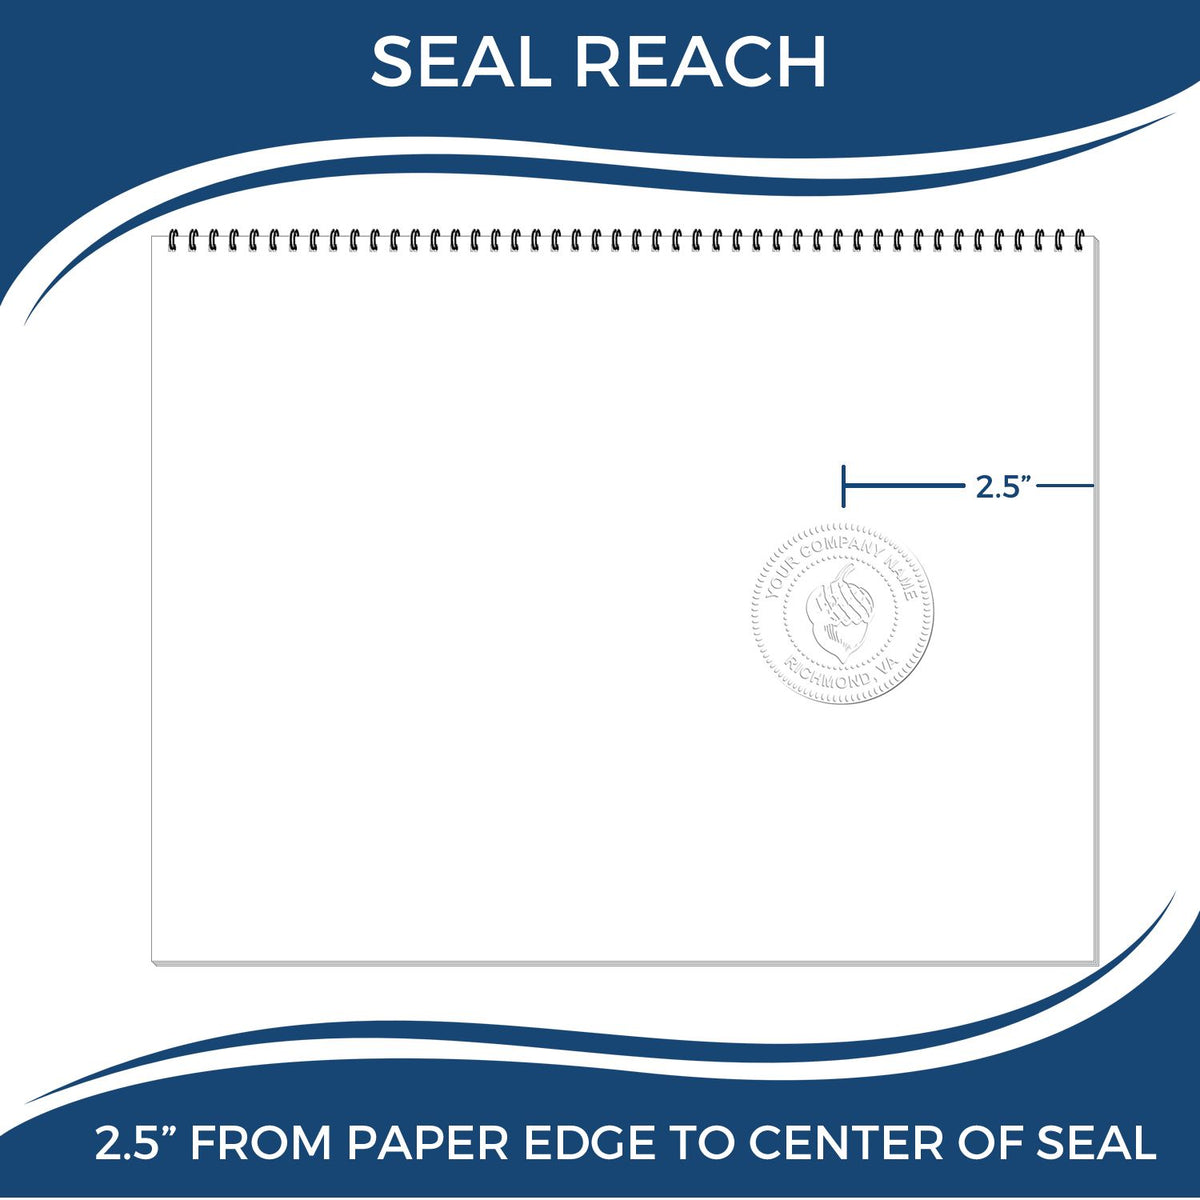 An infographic showing the seal reach which is represented by a ruler and a miniature seal image of the Heavy Duty Cast Iron Hawaii Land Surveyor Seal Embosser